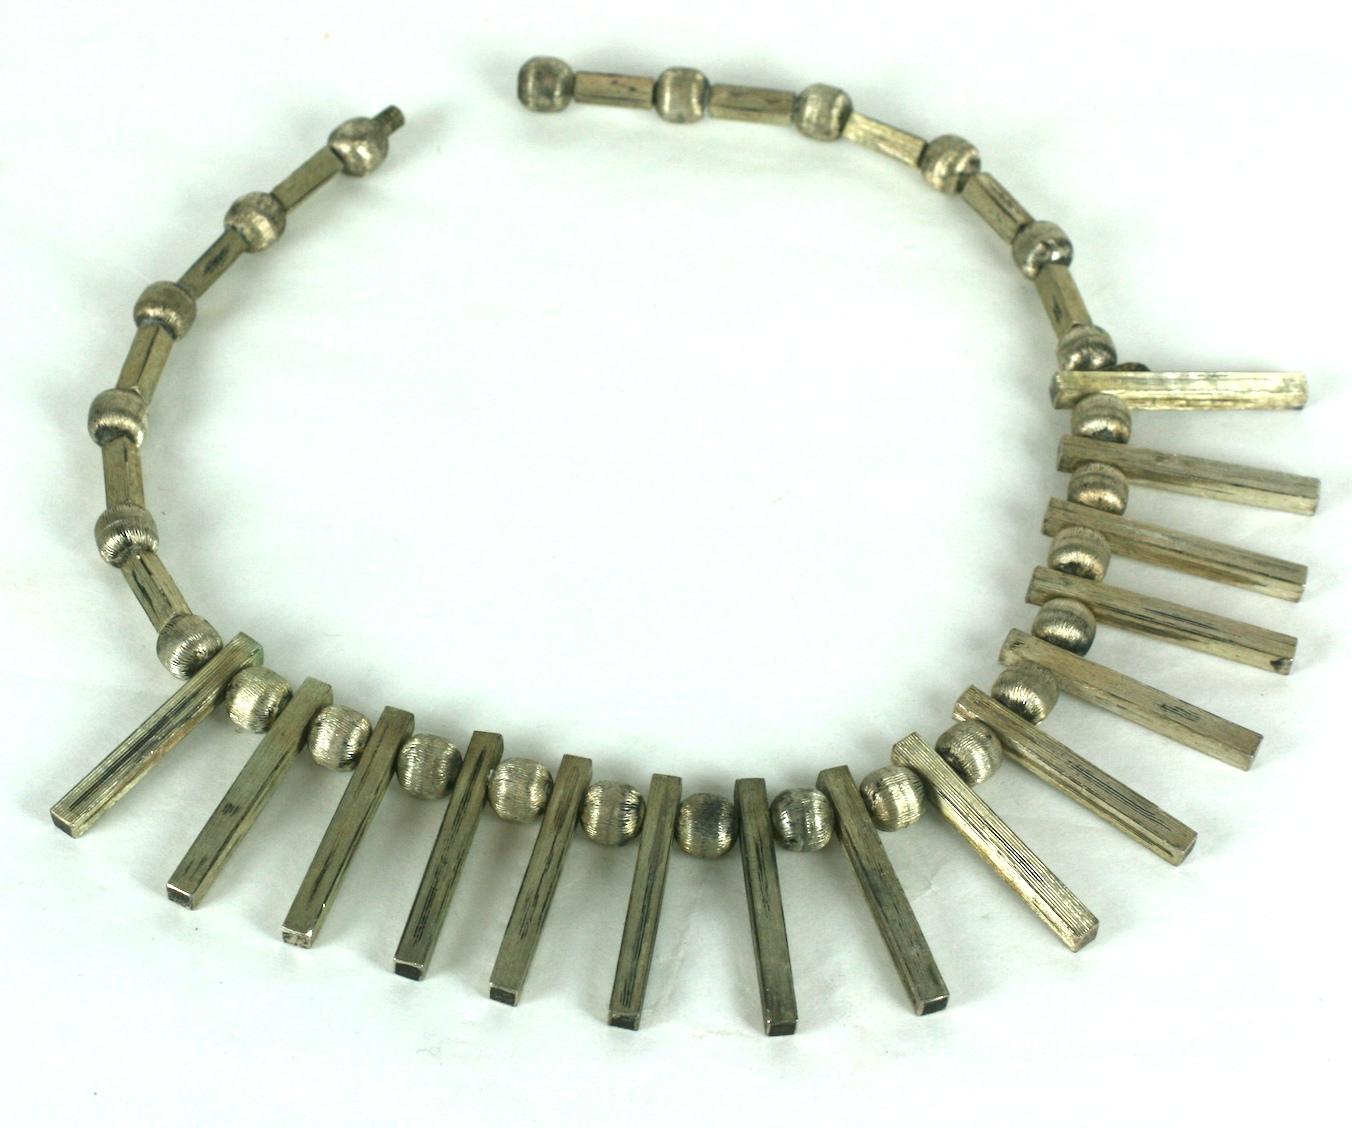 Mexican Sterling Spoke Modernist Necklace from the 1950's. Sterling is ribbed on the beads and spokes throughout. Clean and elegant. Double ball screw clasp.
1950's Taxco, Mexico. 
15.5